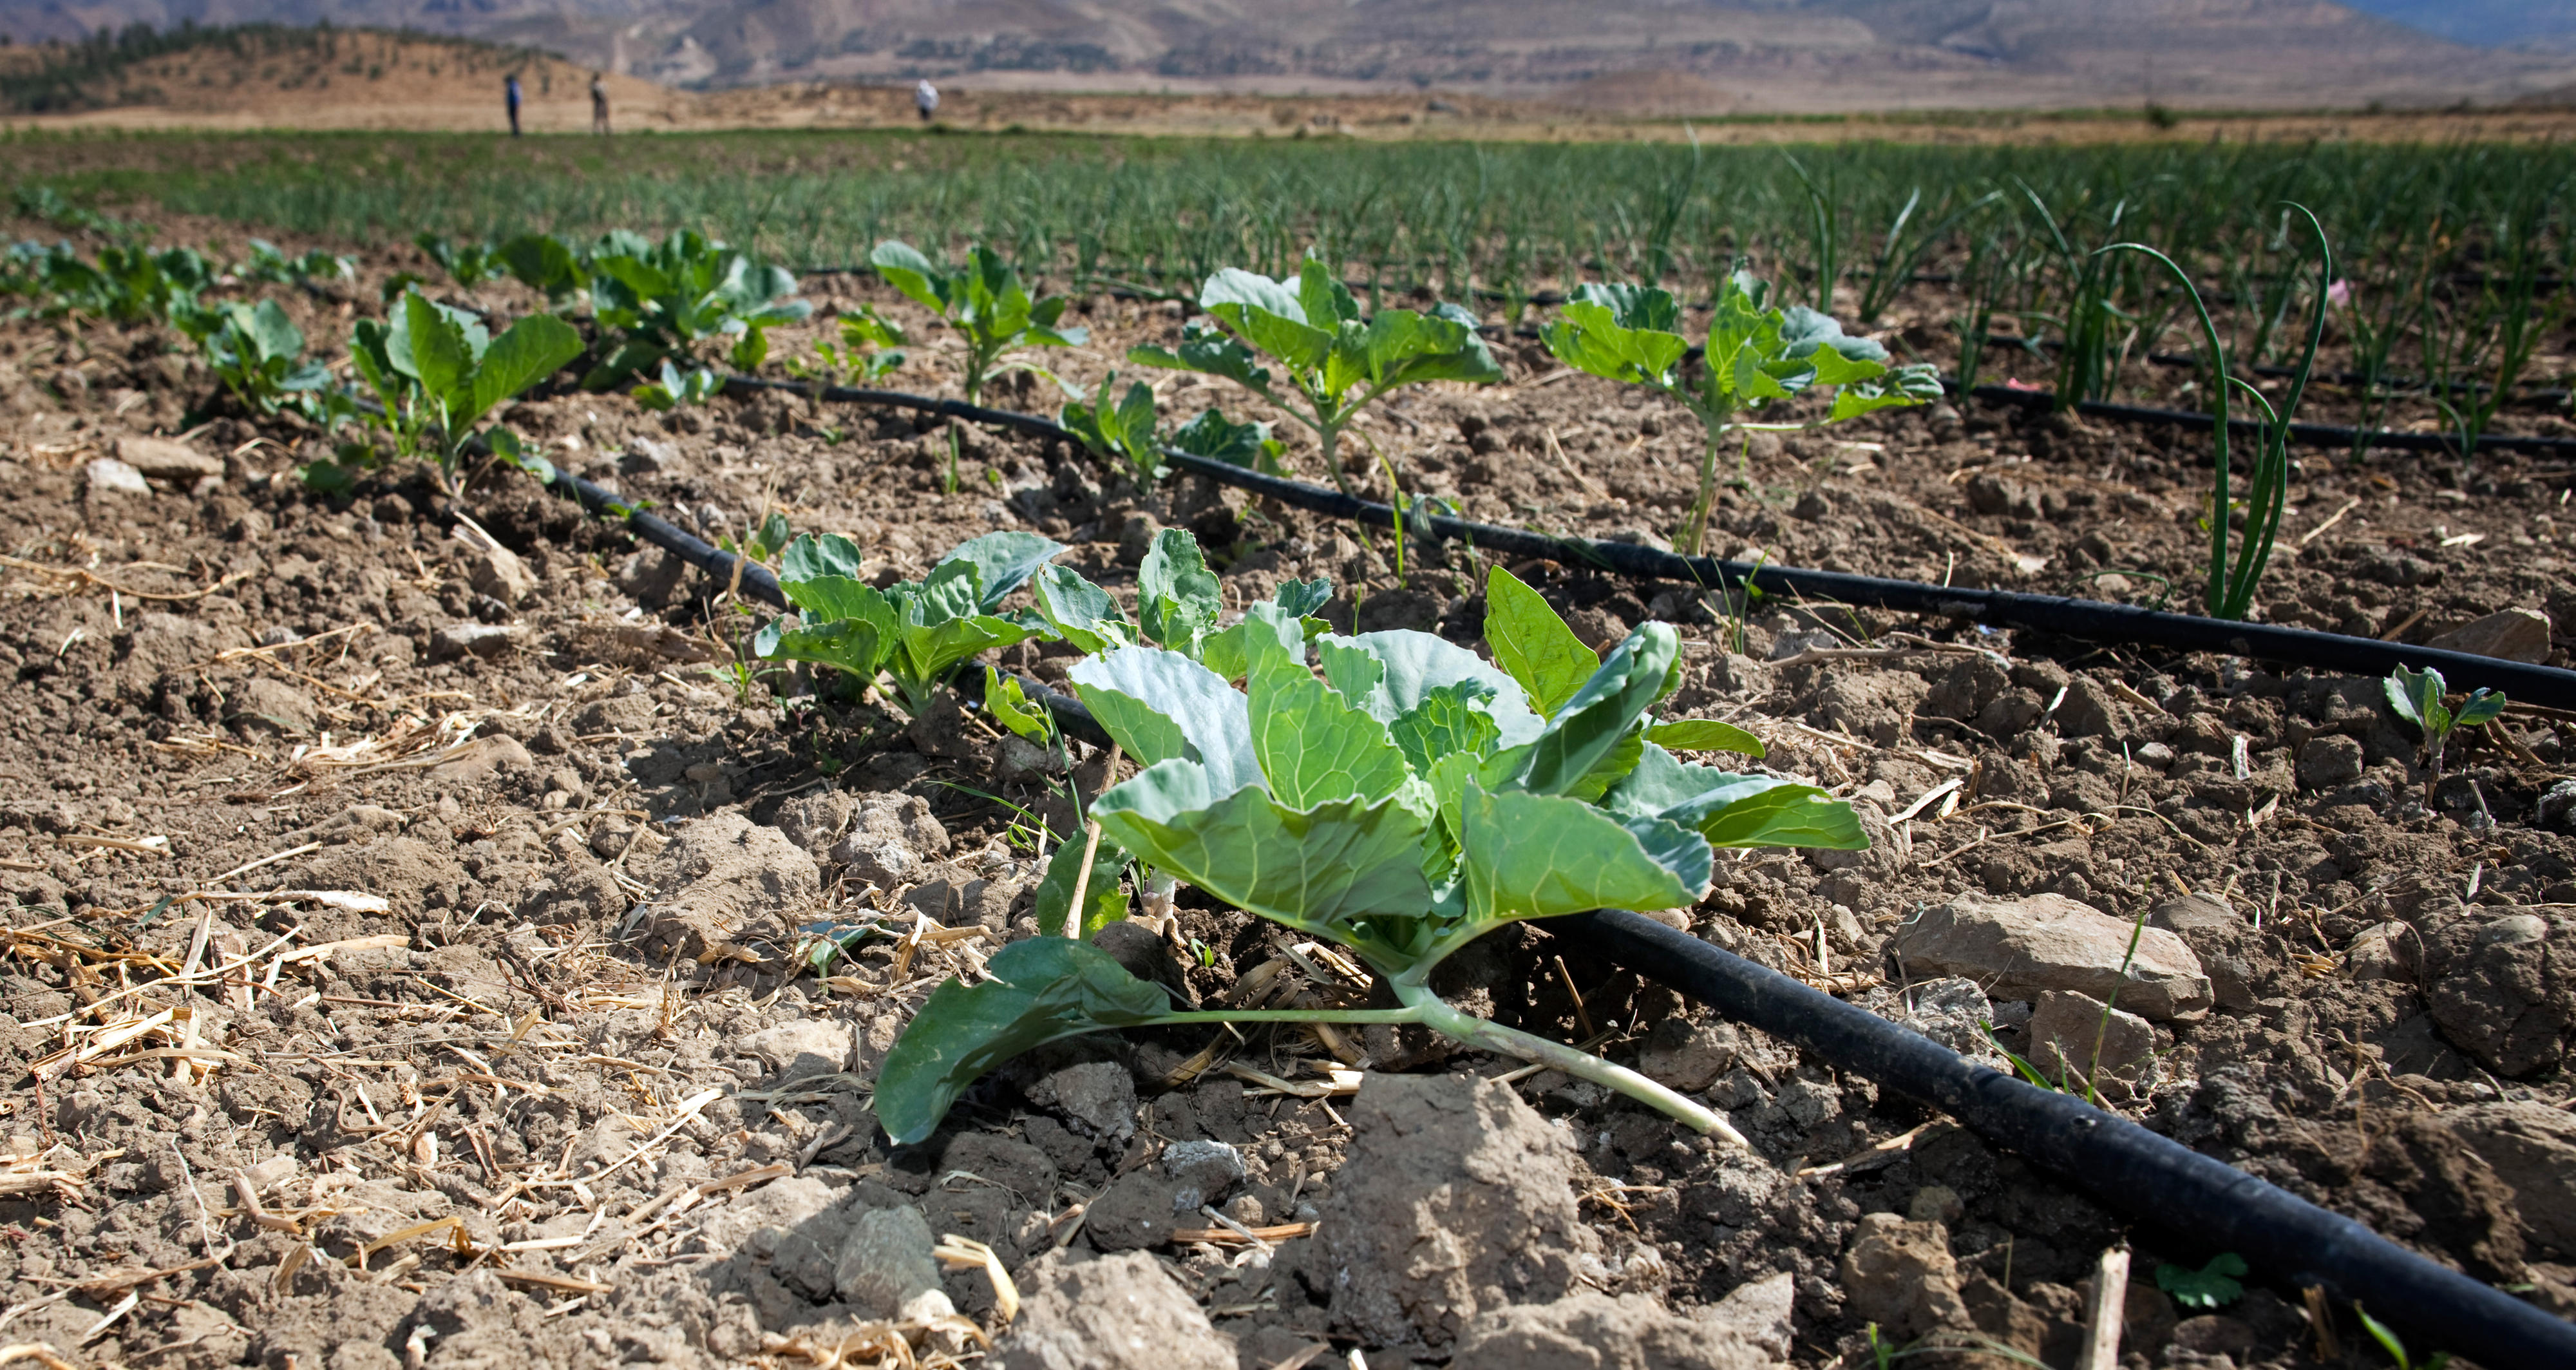 Drip irrigation in a field in Ethiopia